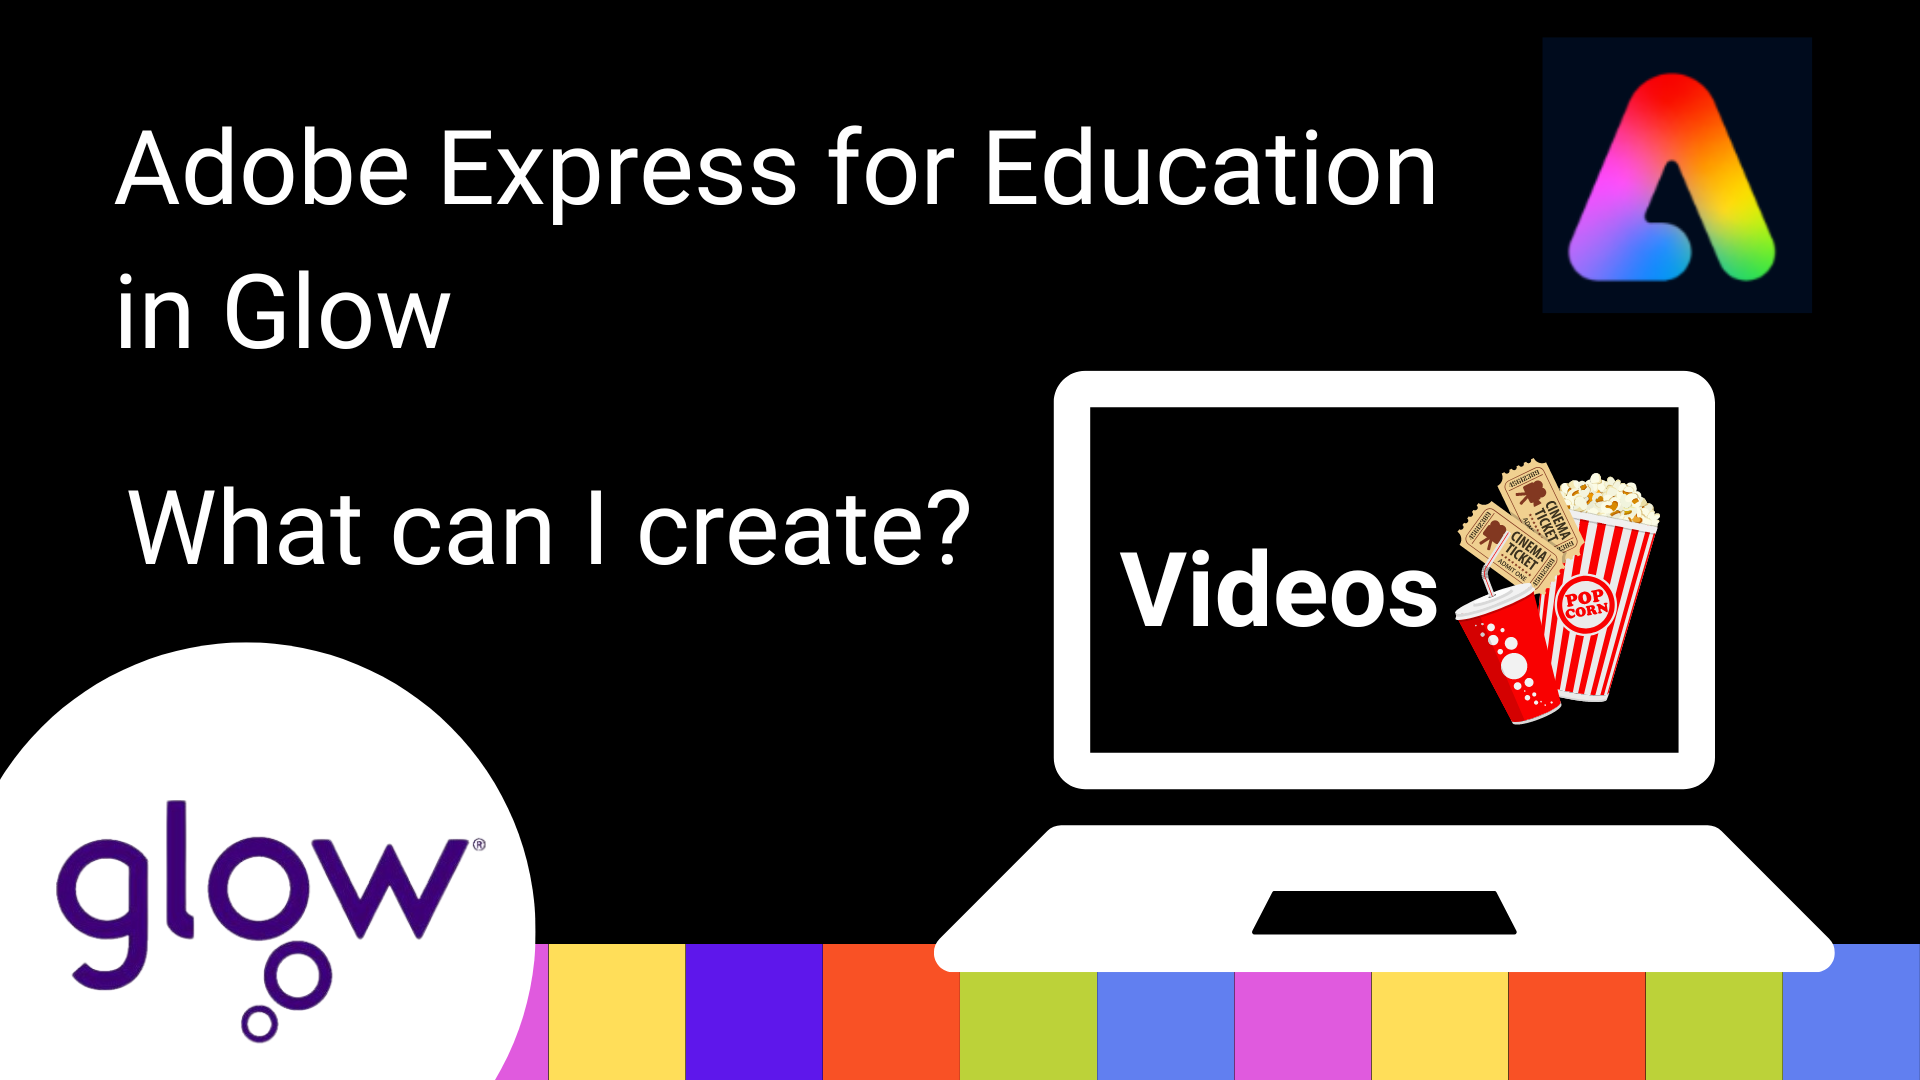 Adobe Express for Education in glow graphic. What can I create? Videos